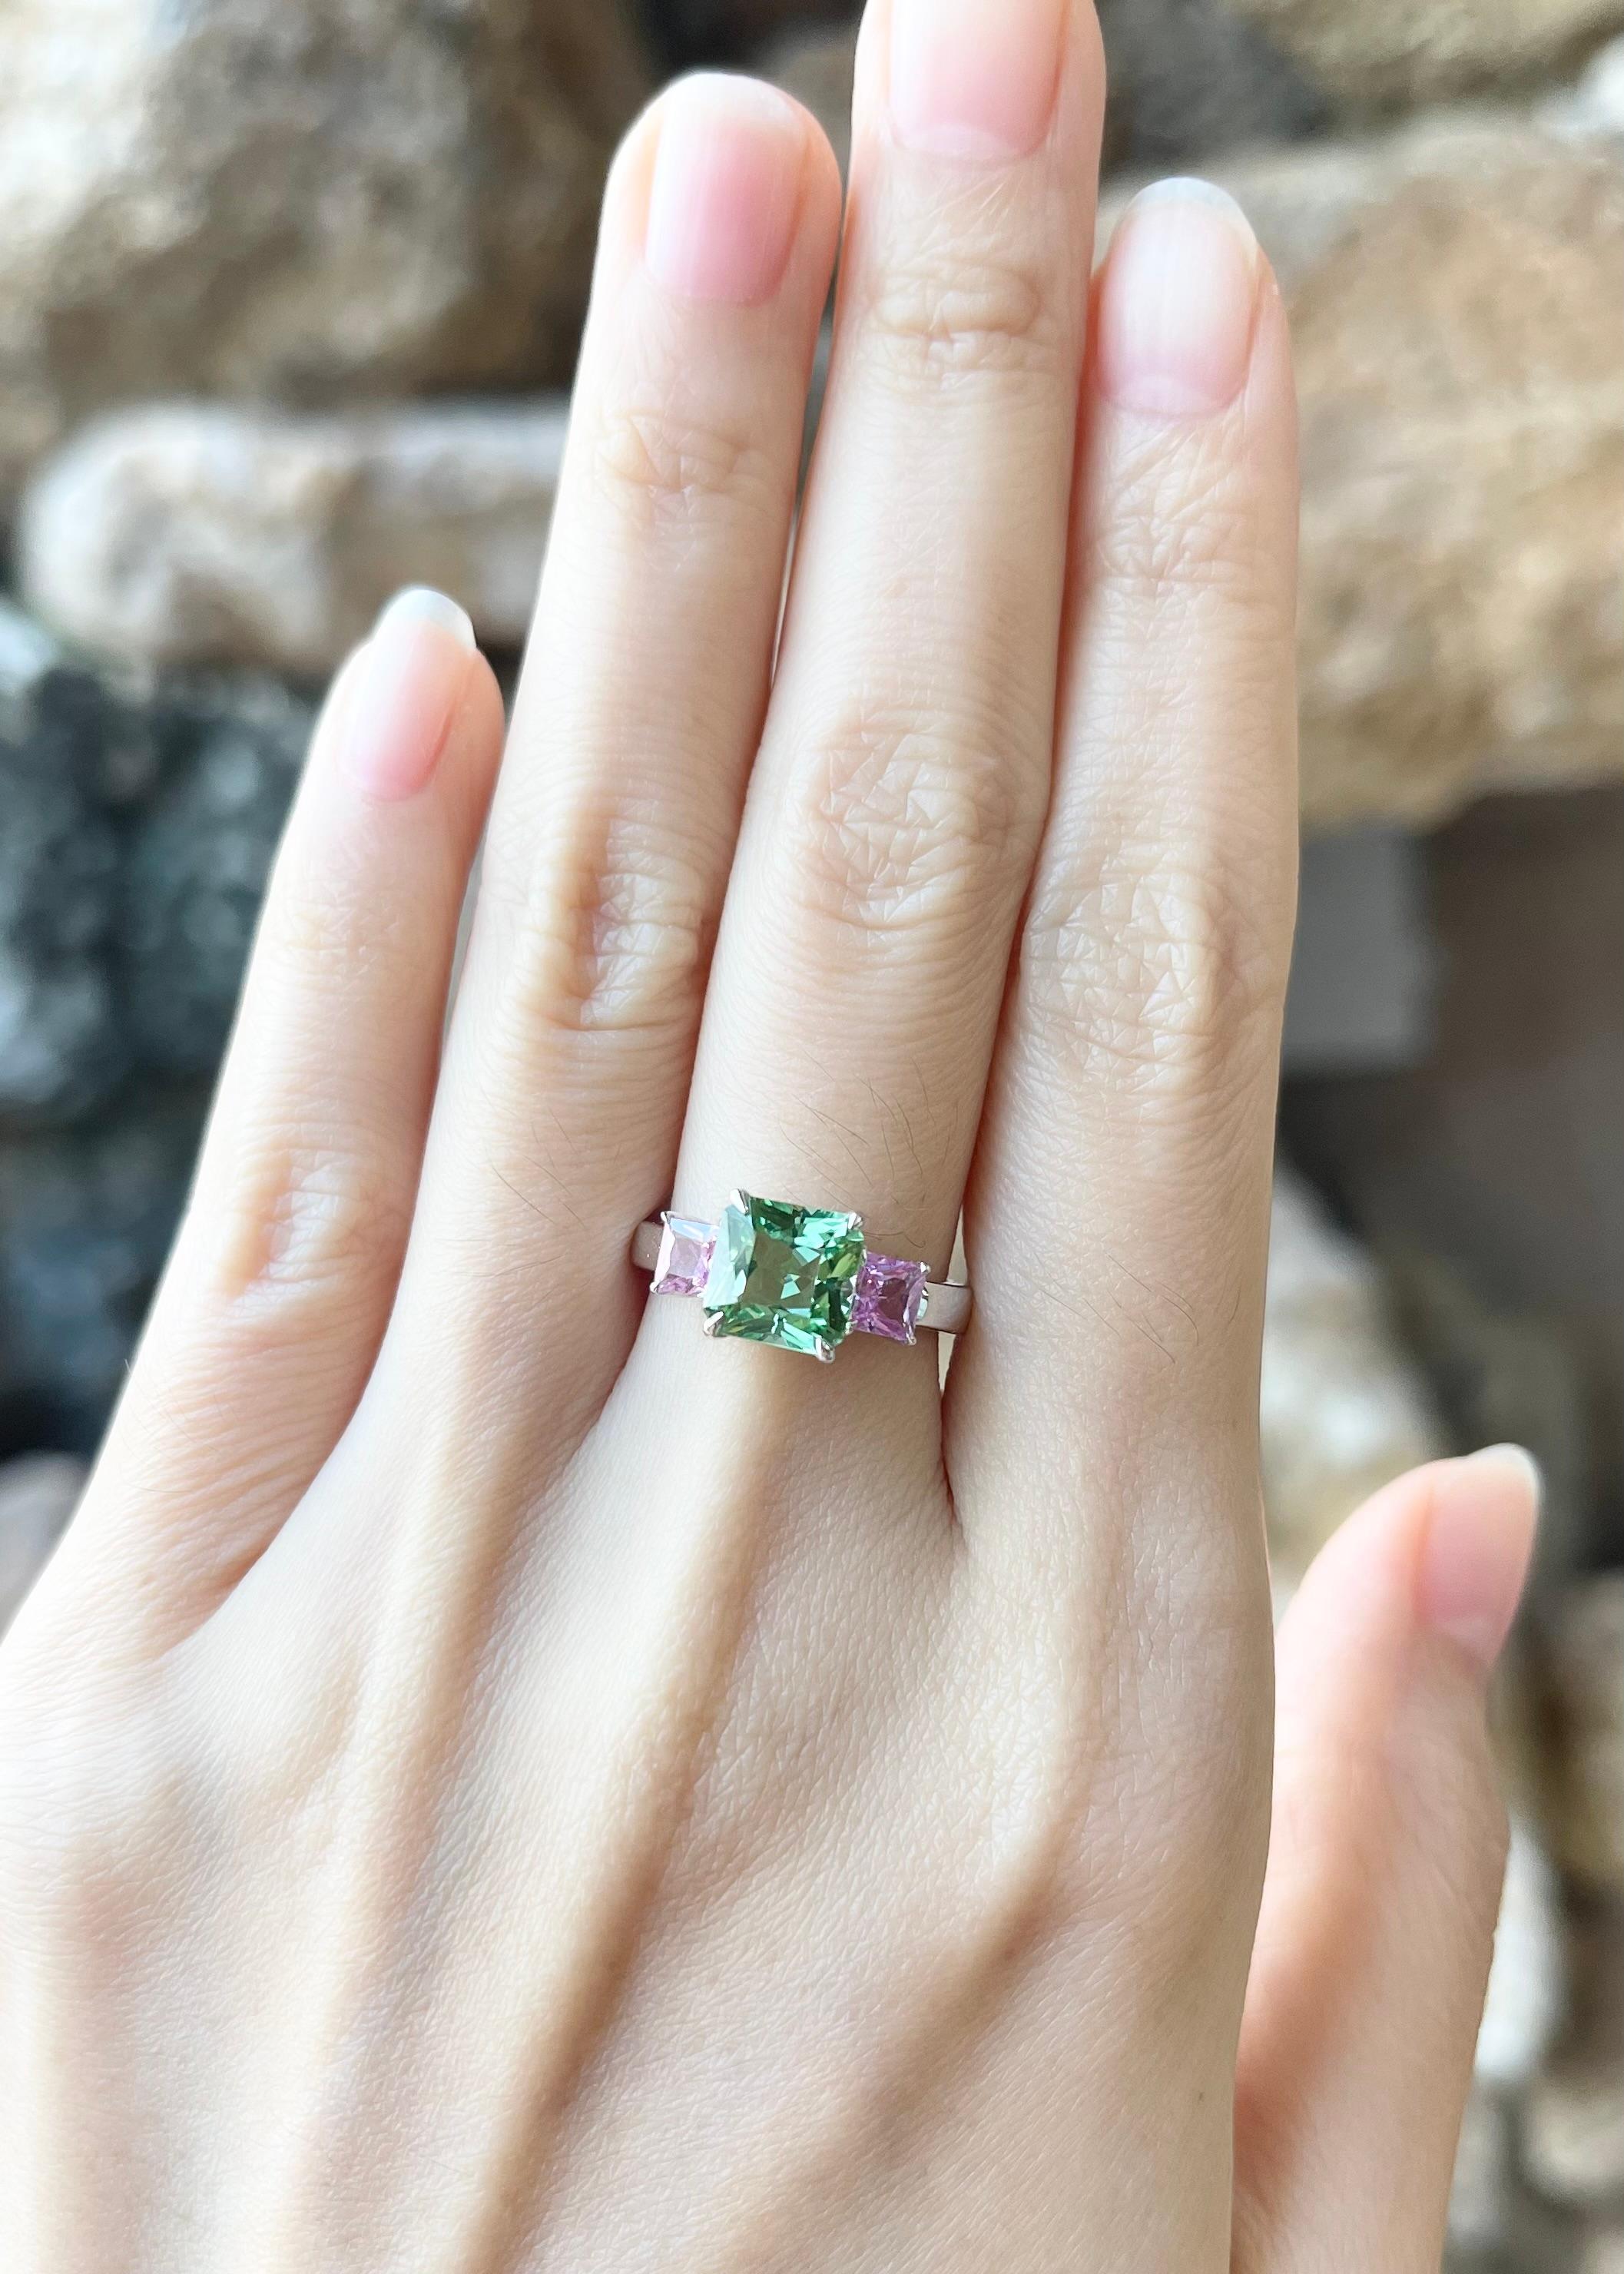 Green Tourmaline 1.85 carats with Pink Sapphire 0.77 carat Ring set in 18K White Gold Settings

Width:  1.4 cm 
Length: 0.7 cm
Ring Size: 52
Total Weight: 4.45 grams

